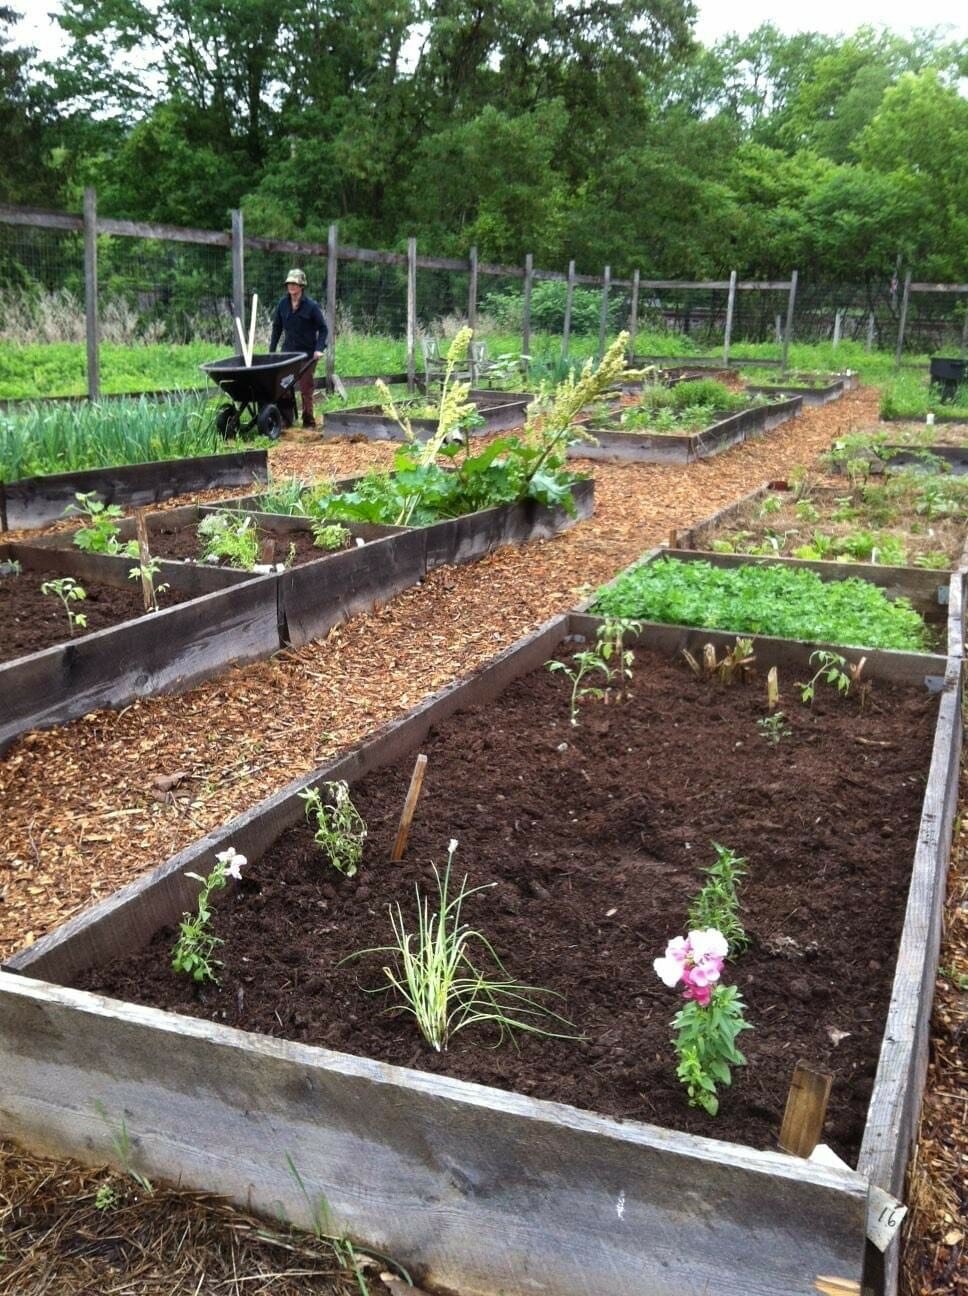 The Tusten Heritage Community Garden offers 4-foot-by-eight-foot raised beds in a 30-foot-by-100-foot deer-fenced area, with access to tools, soil supplements and free events and workshops throughout the year.